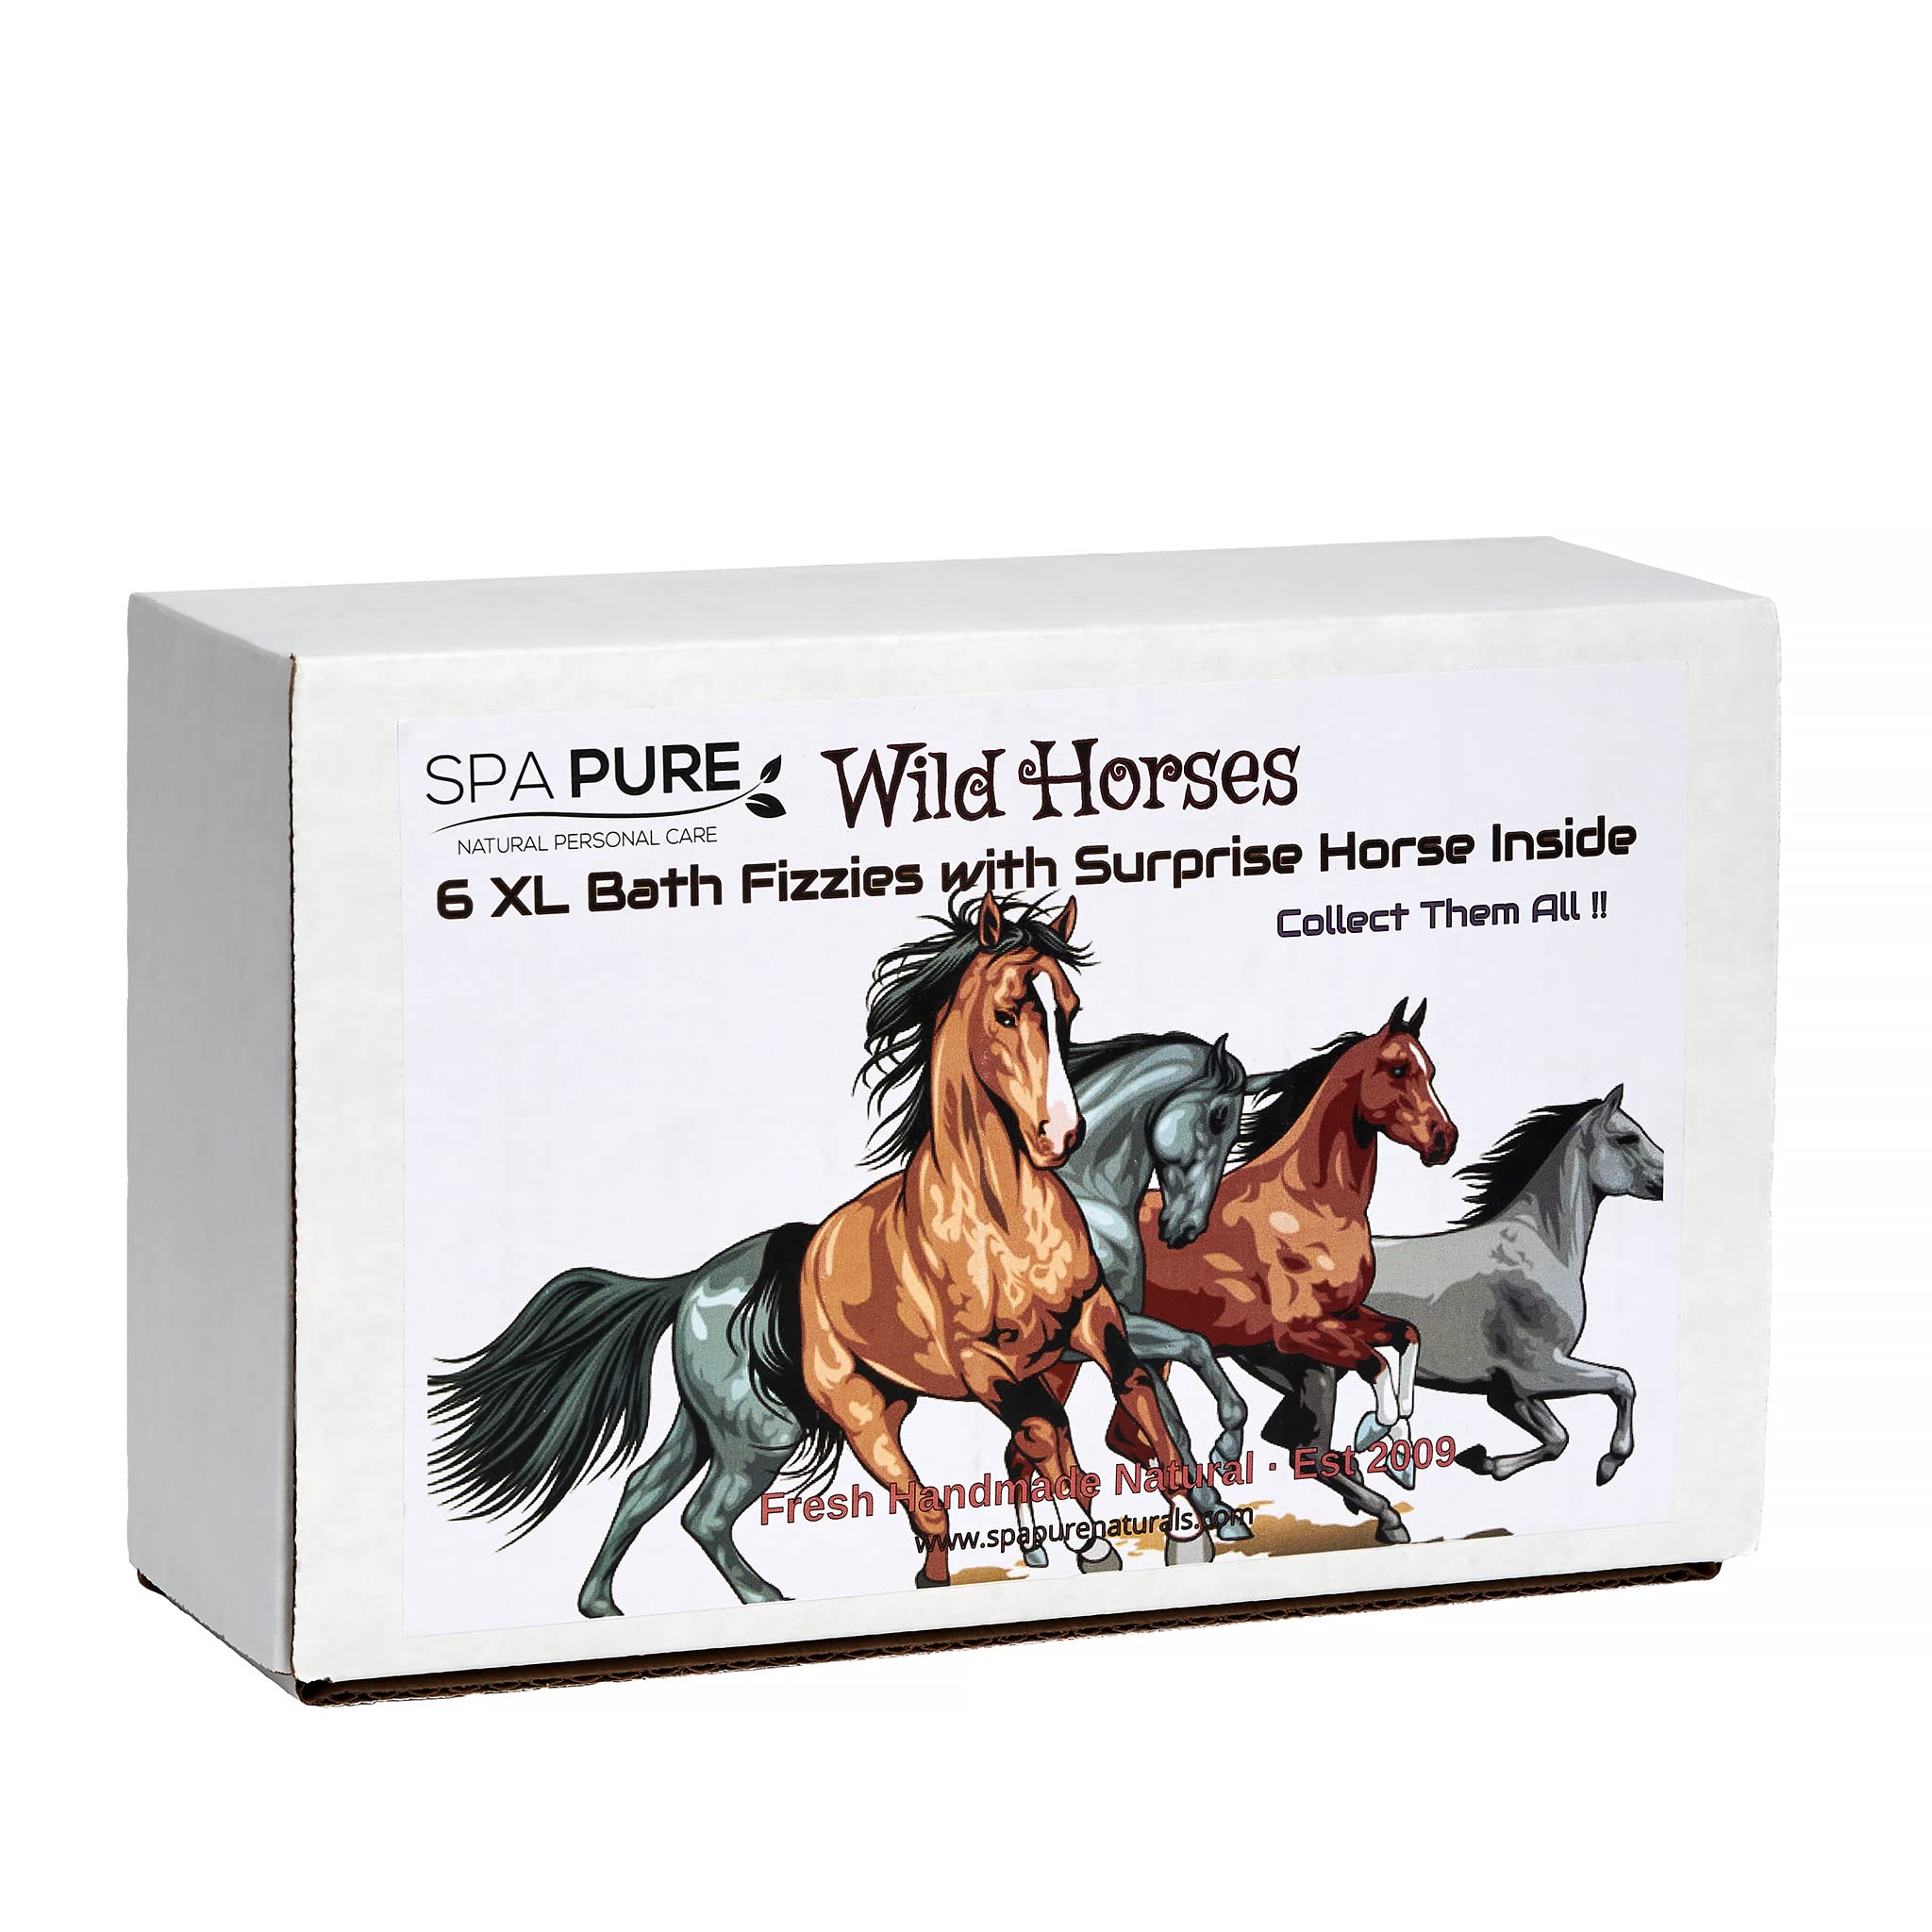 SPAPURE Wild Horses Bath Bombs: for Kids with 6 XL Bath Bombs with Surprise Horses Inside, USA Made, Handmade, Natural Bath Bombs, Birthday Gift idea for Kids, Spa Parties